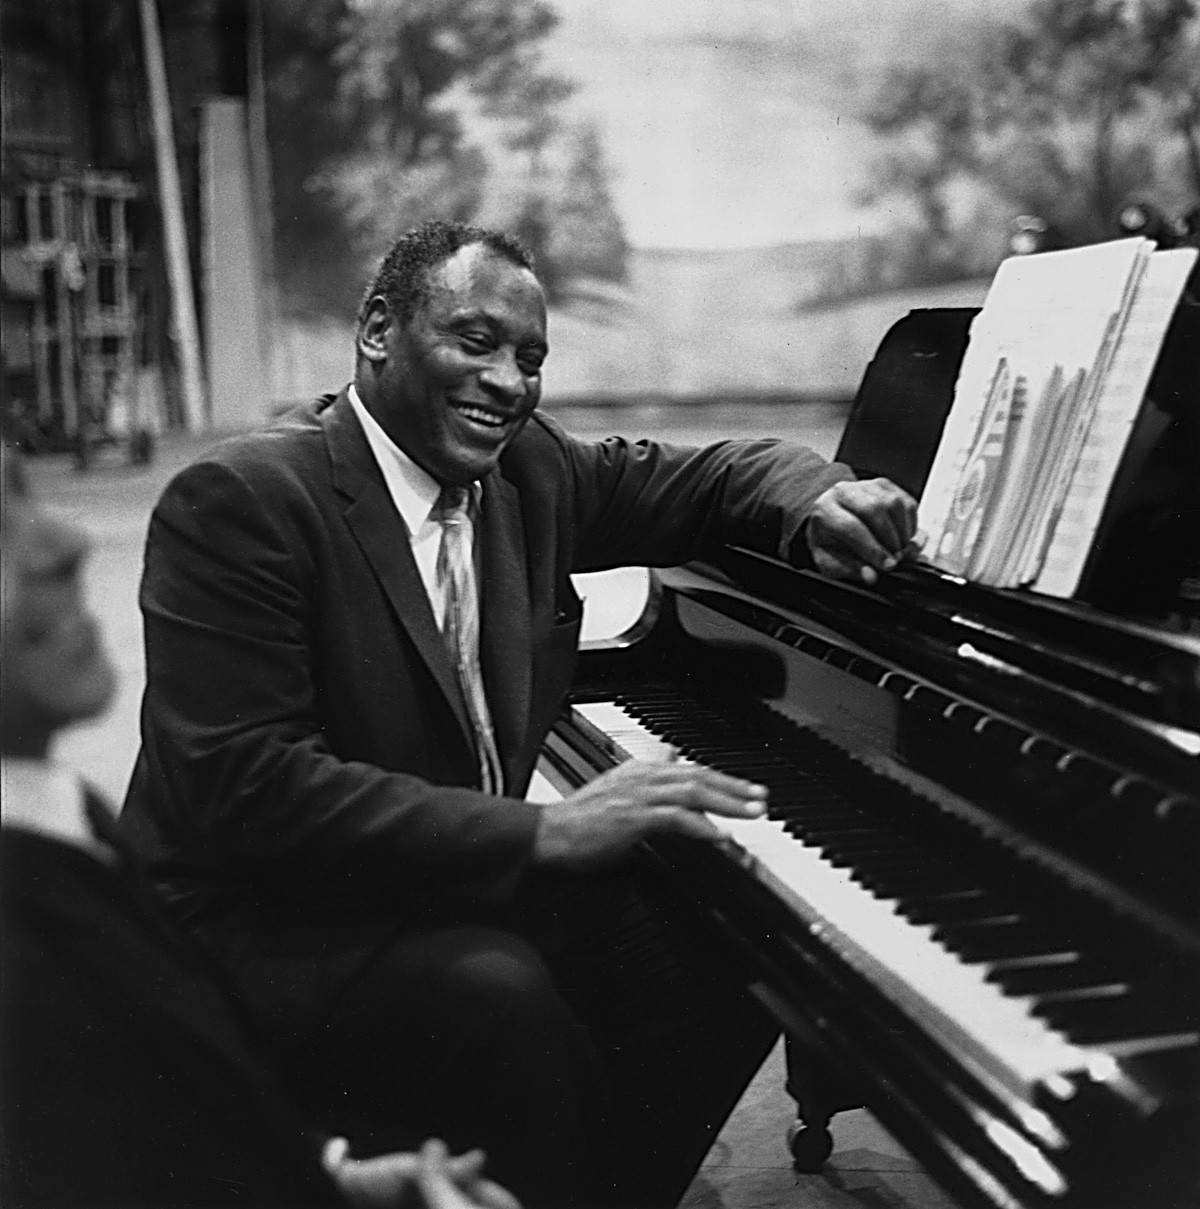 22nd July 1958: American singer, acclaimed actor of stage and screen, political activist and civil rights campaigner Paul Robeson (1898 - 1976), rehearses in relaxed mood at the piano